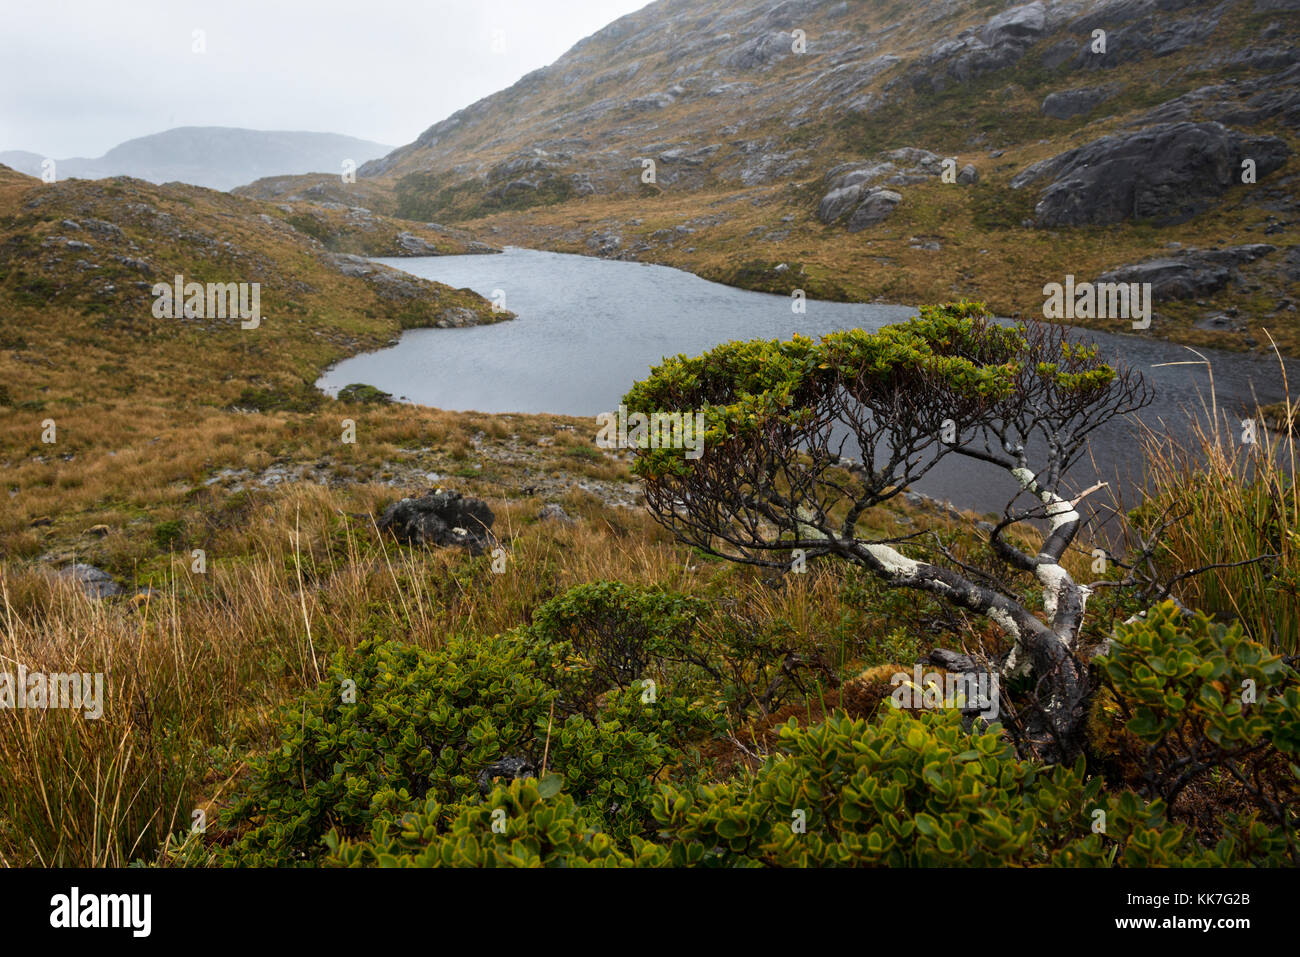 Natural bonsai tree in a remote island in Southern Chile fjords Stock Photo